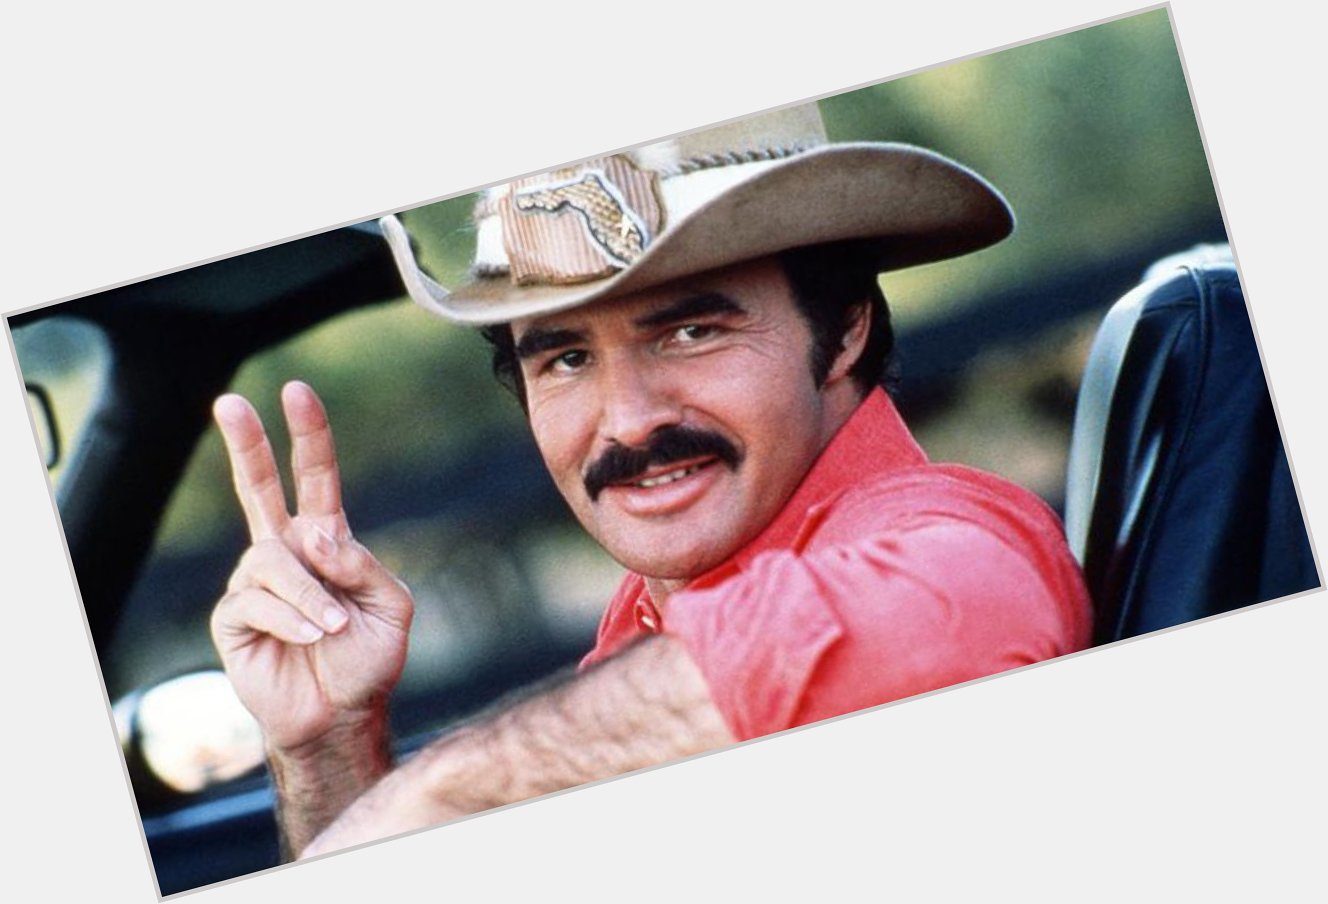 The Man. The Myth. The Legend. Happy Birthday to the late great Burt Reynolds! 